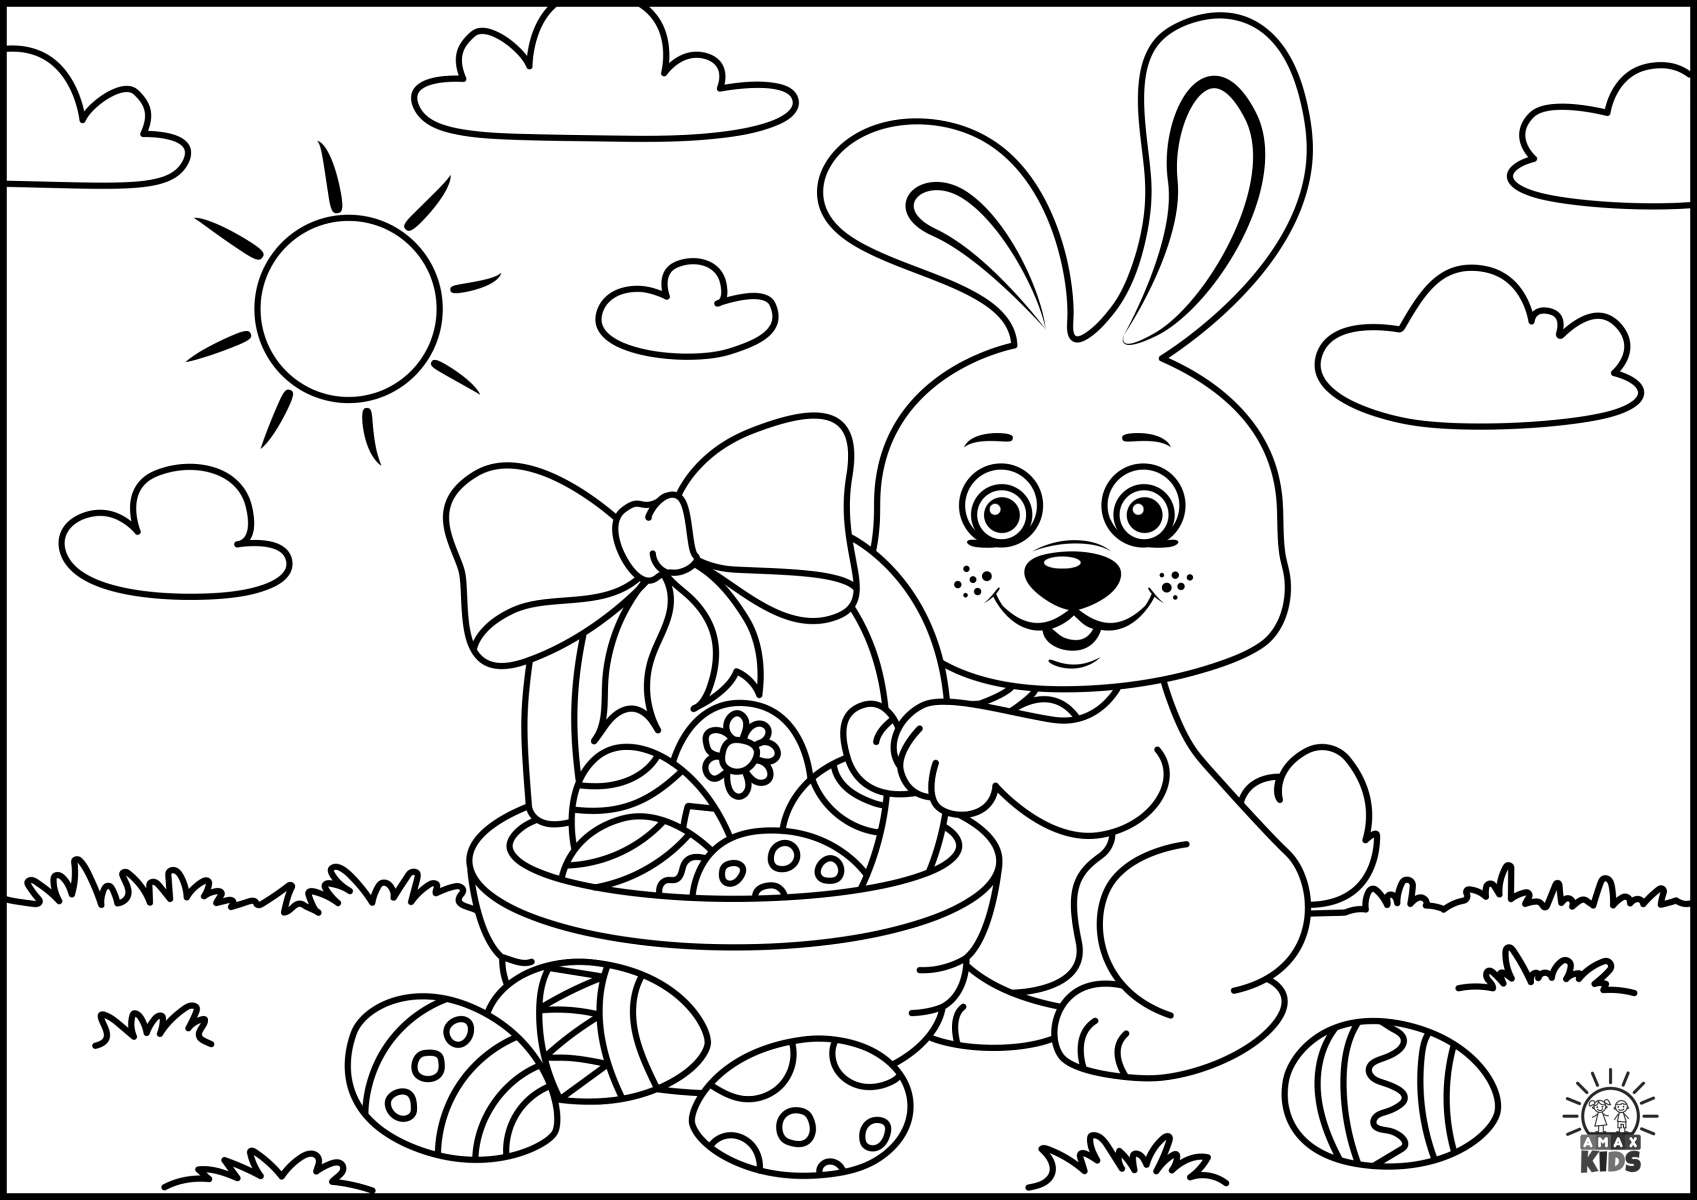 141 Cute Easter Coloring Pages Online with Animal character